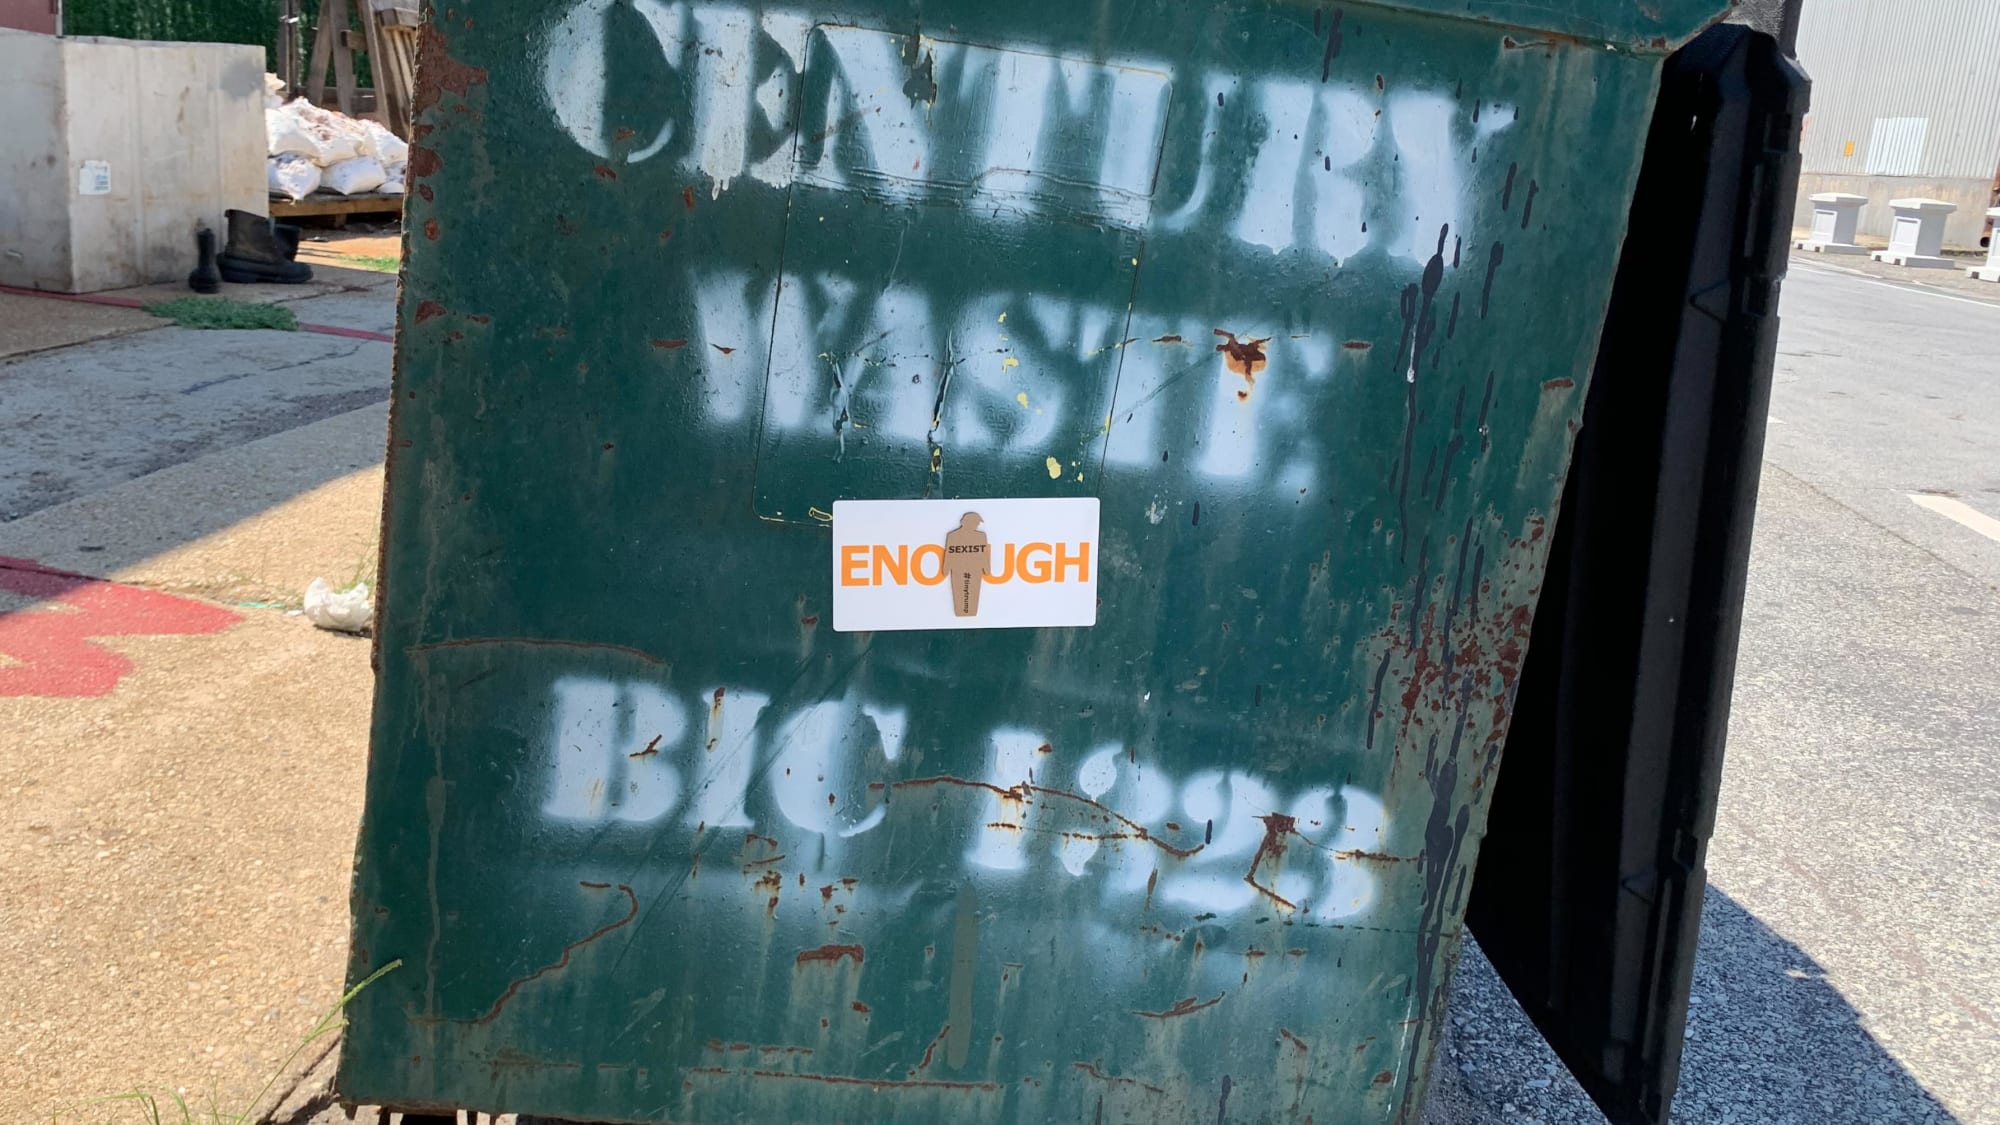 Small thumbnail image of Photograph of a tiny trump ENOUGH sticker on a dumpster in the street. The tiny trump stuck in the middle bears the slogan Sexist, so the combination reads ENOUGH Sexist